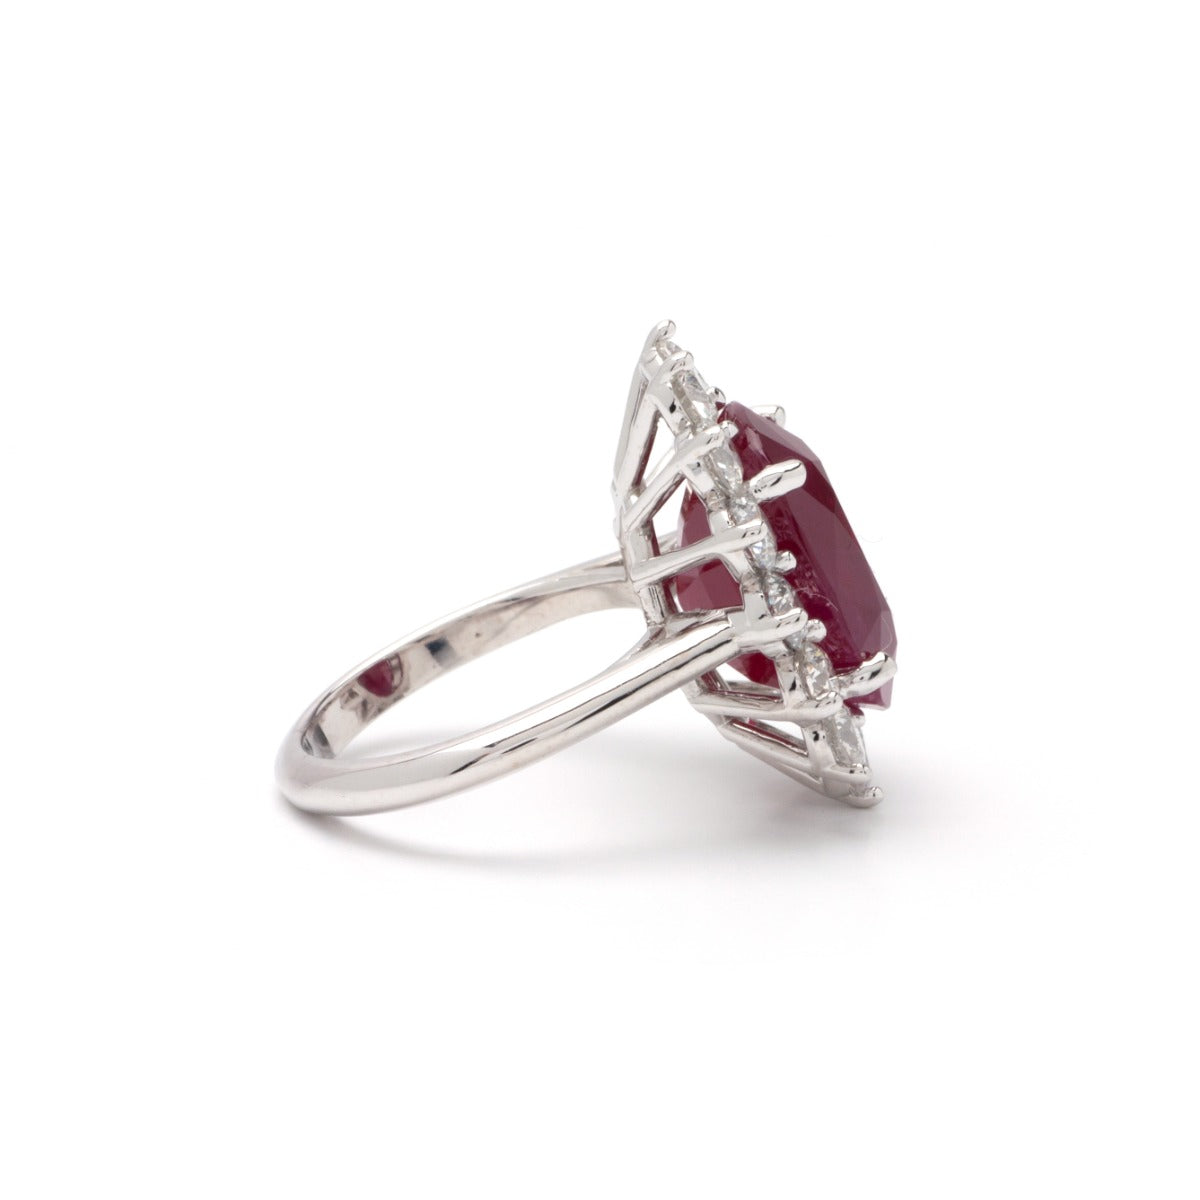 Oval Ruby Halo Ring in 14K White Gold; 14.63 CTW